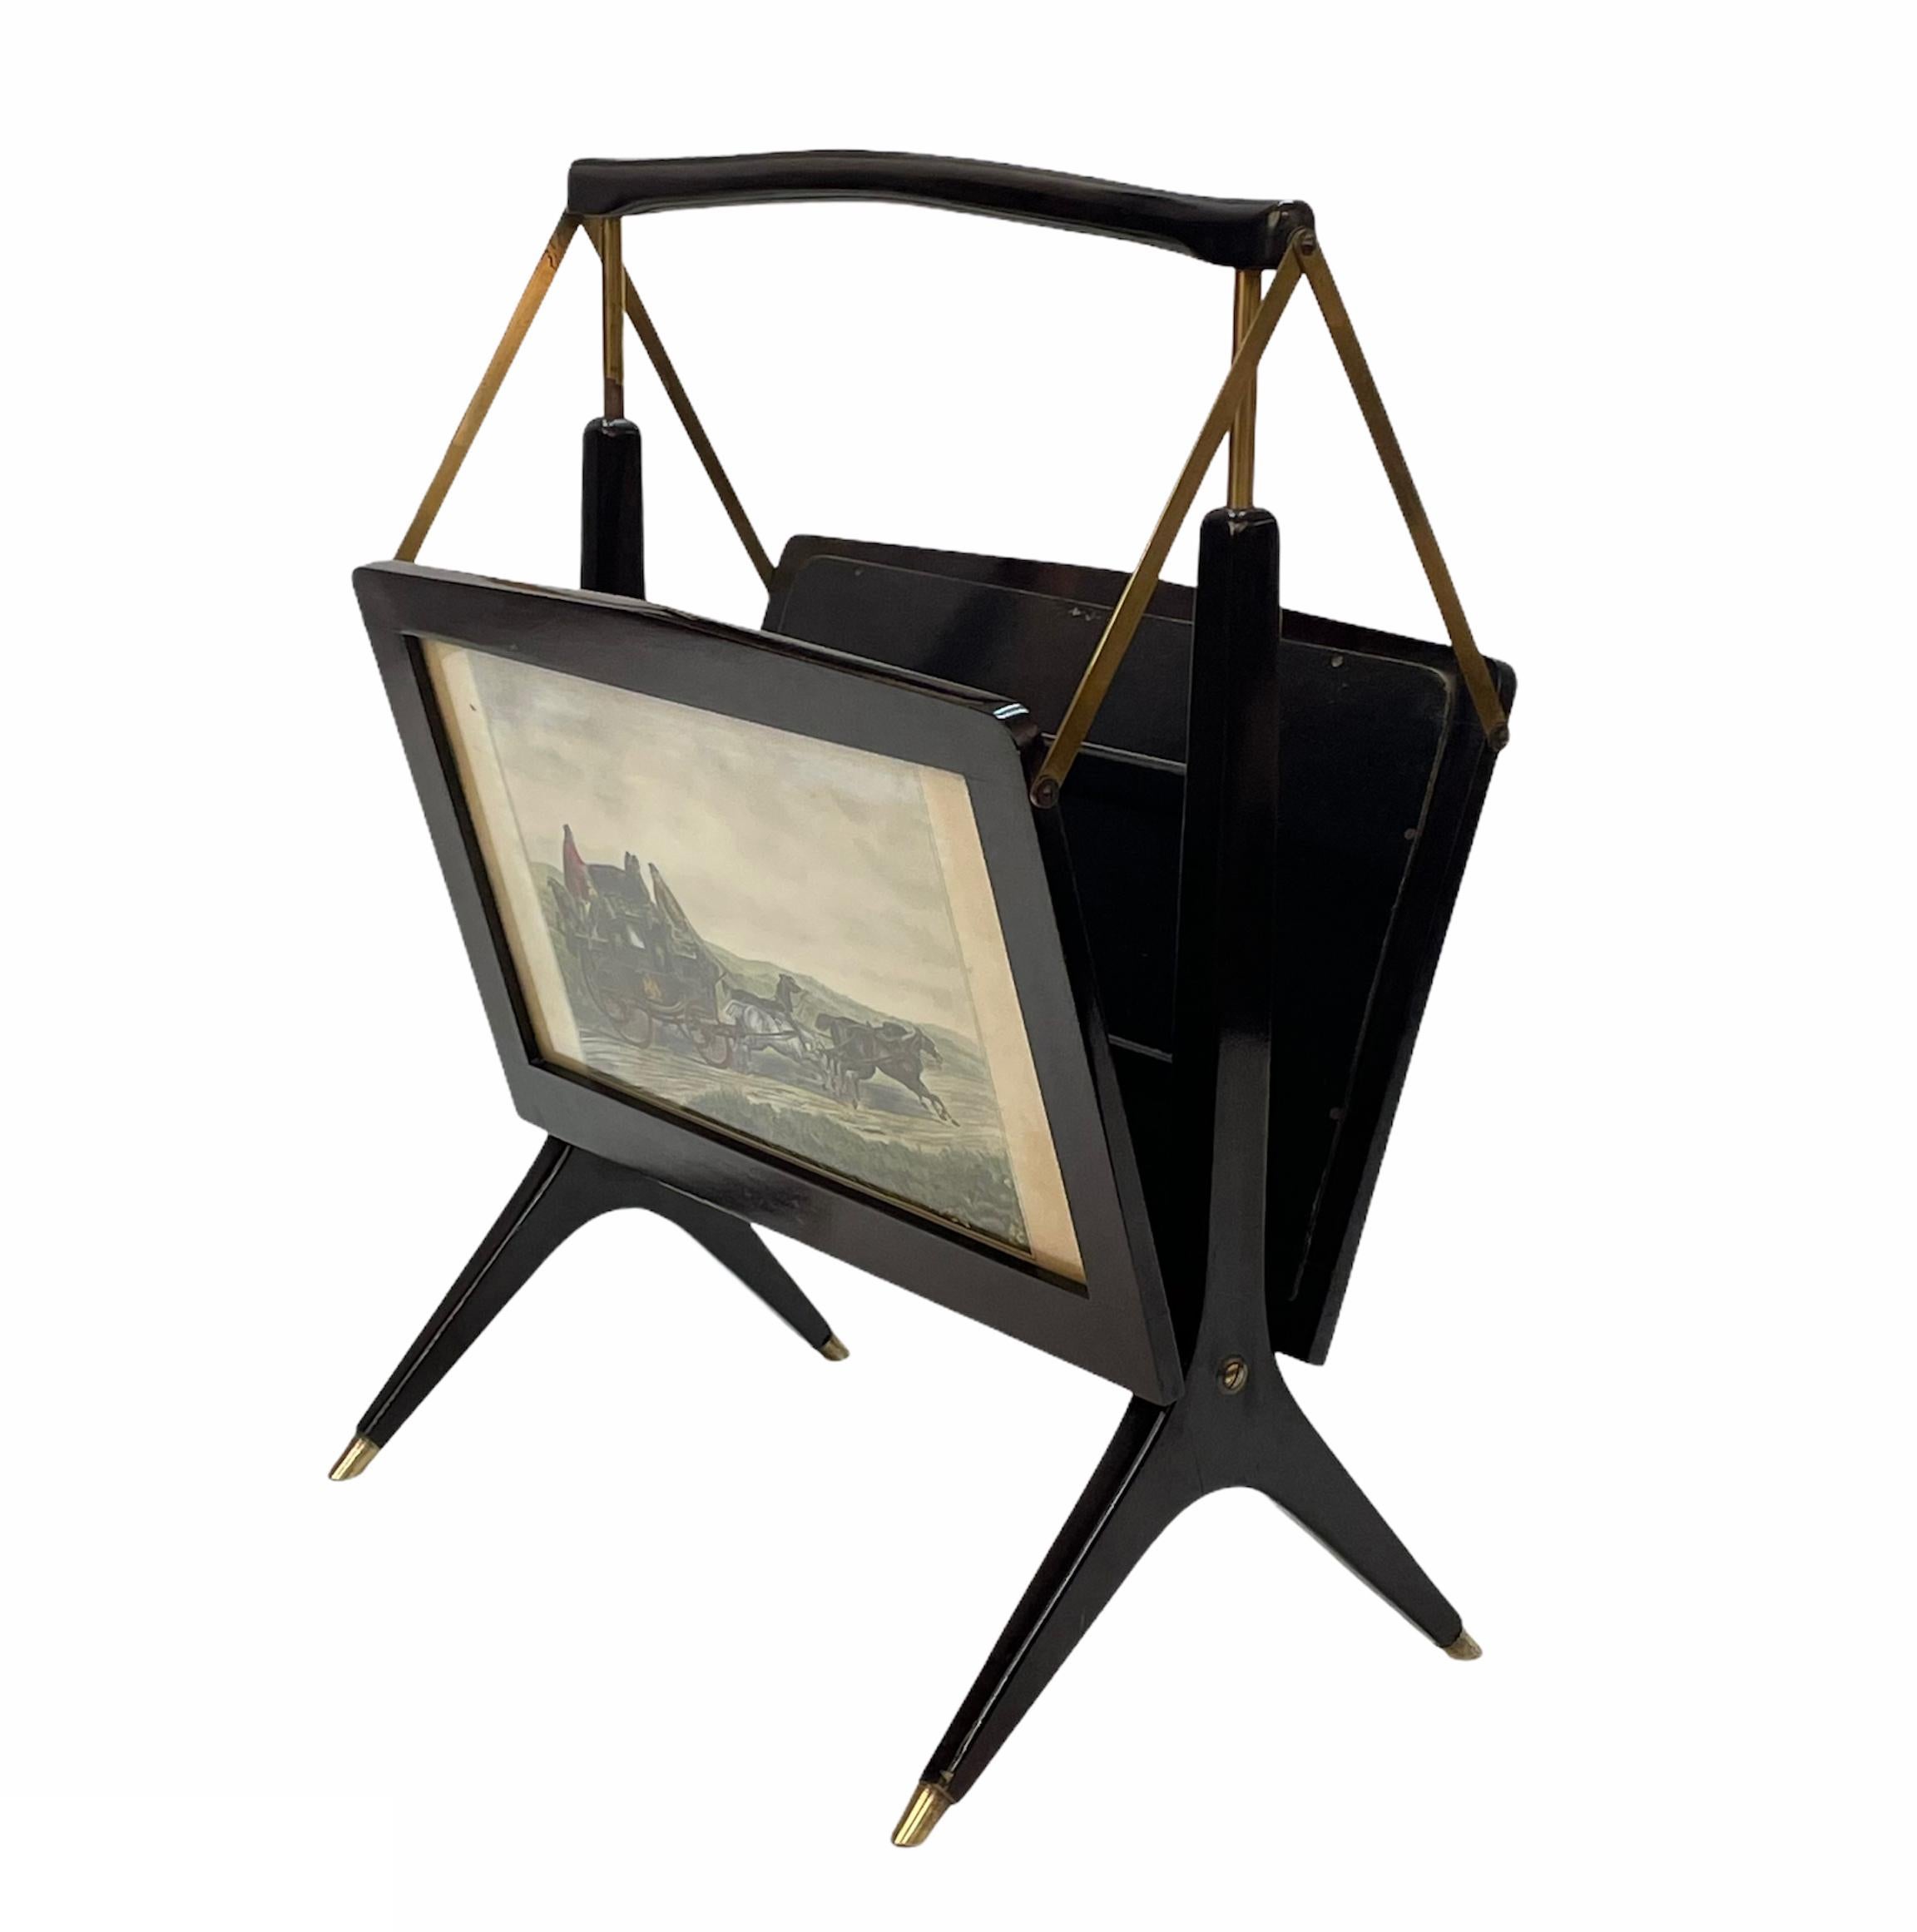 Midcentury Cesare Lacca Wood and Brass Italian Foldable Magazine Rack, 1950s For Sale 2